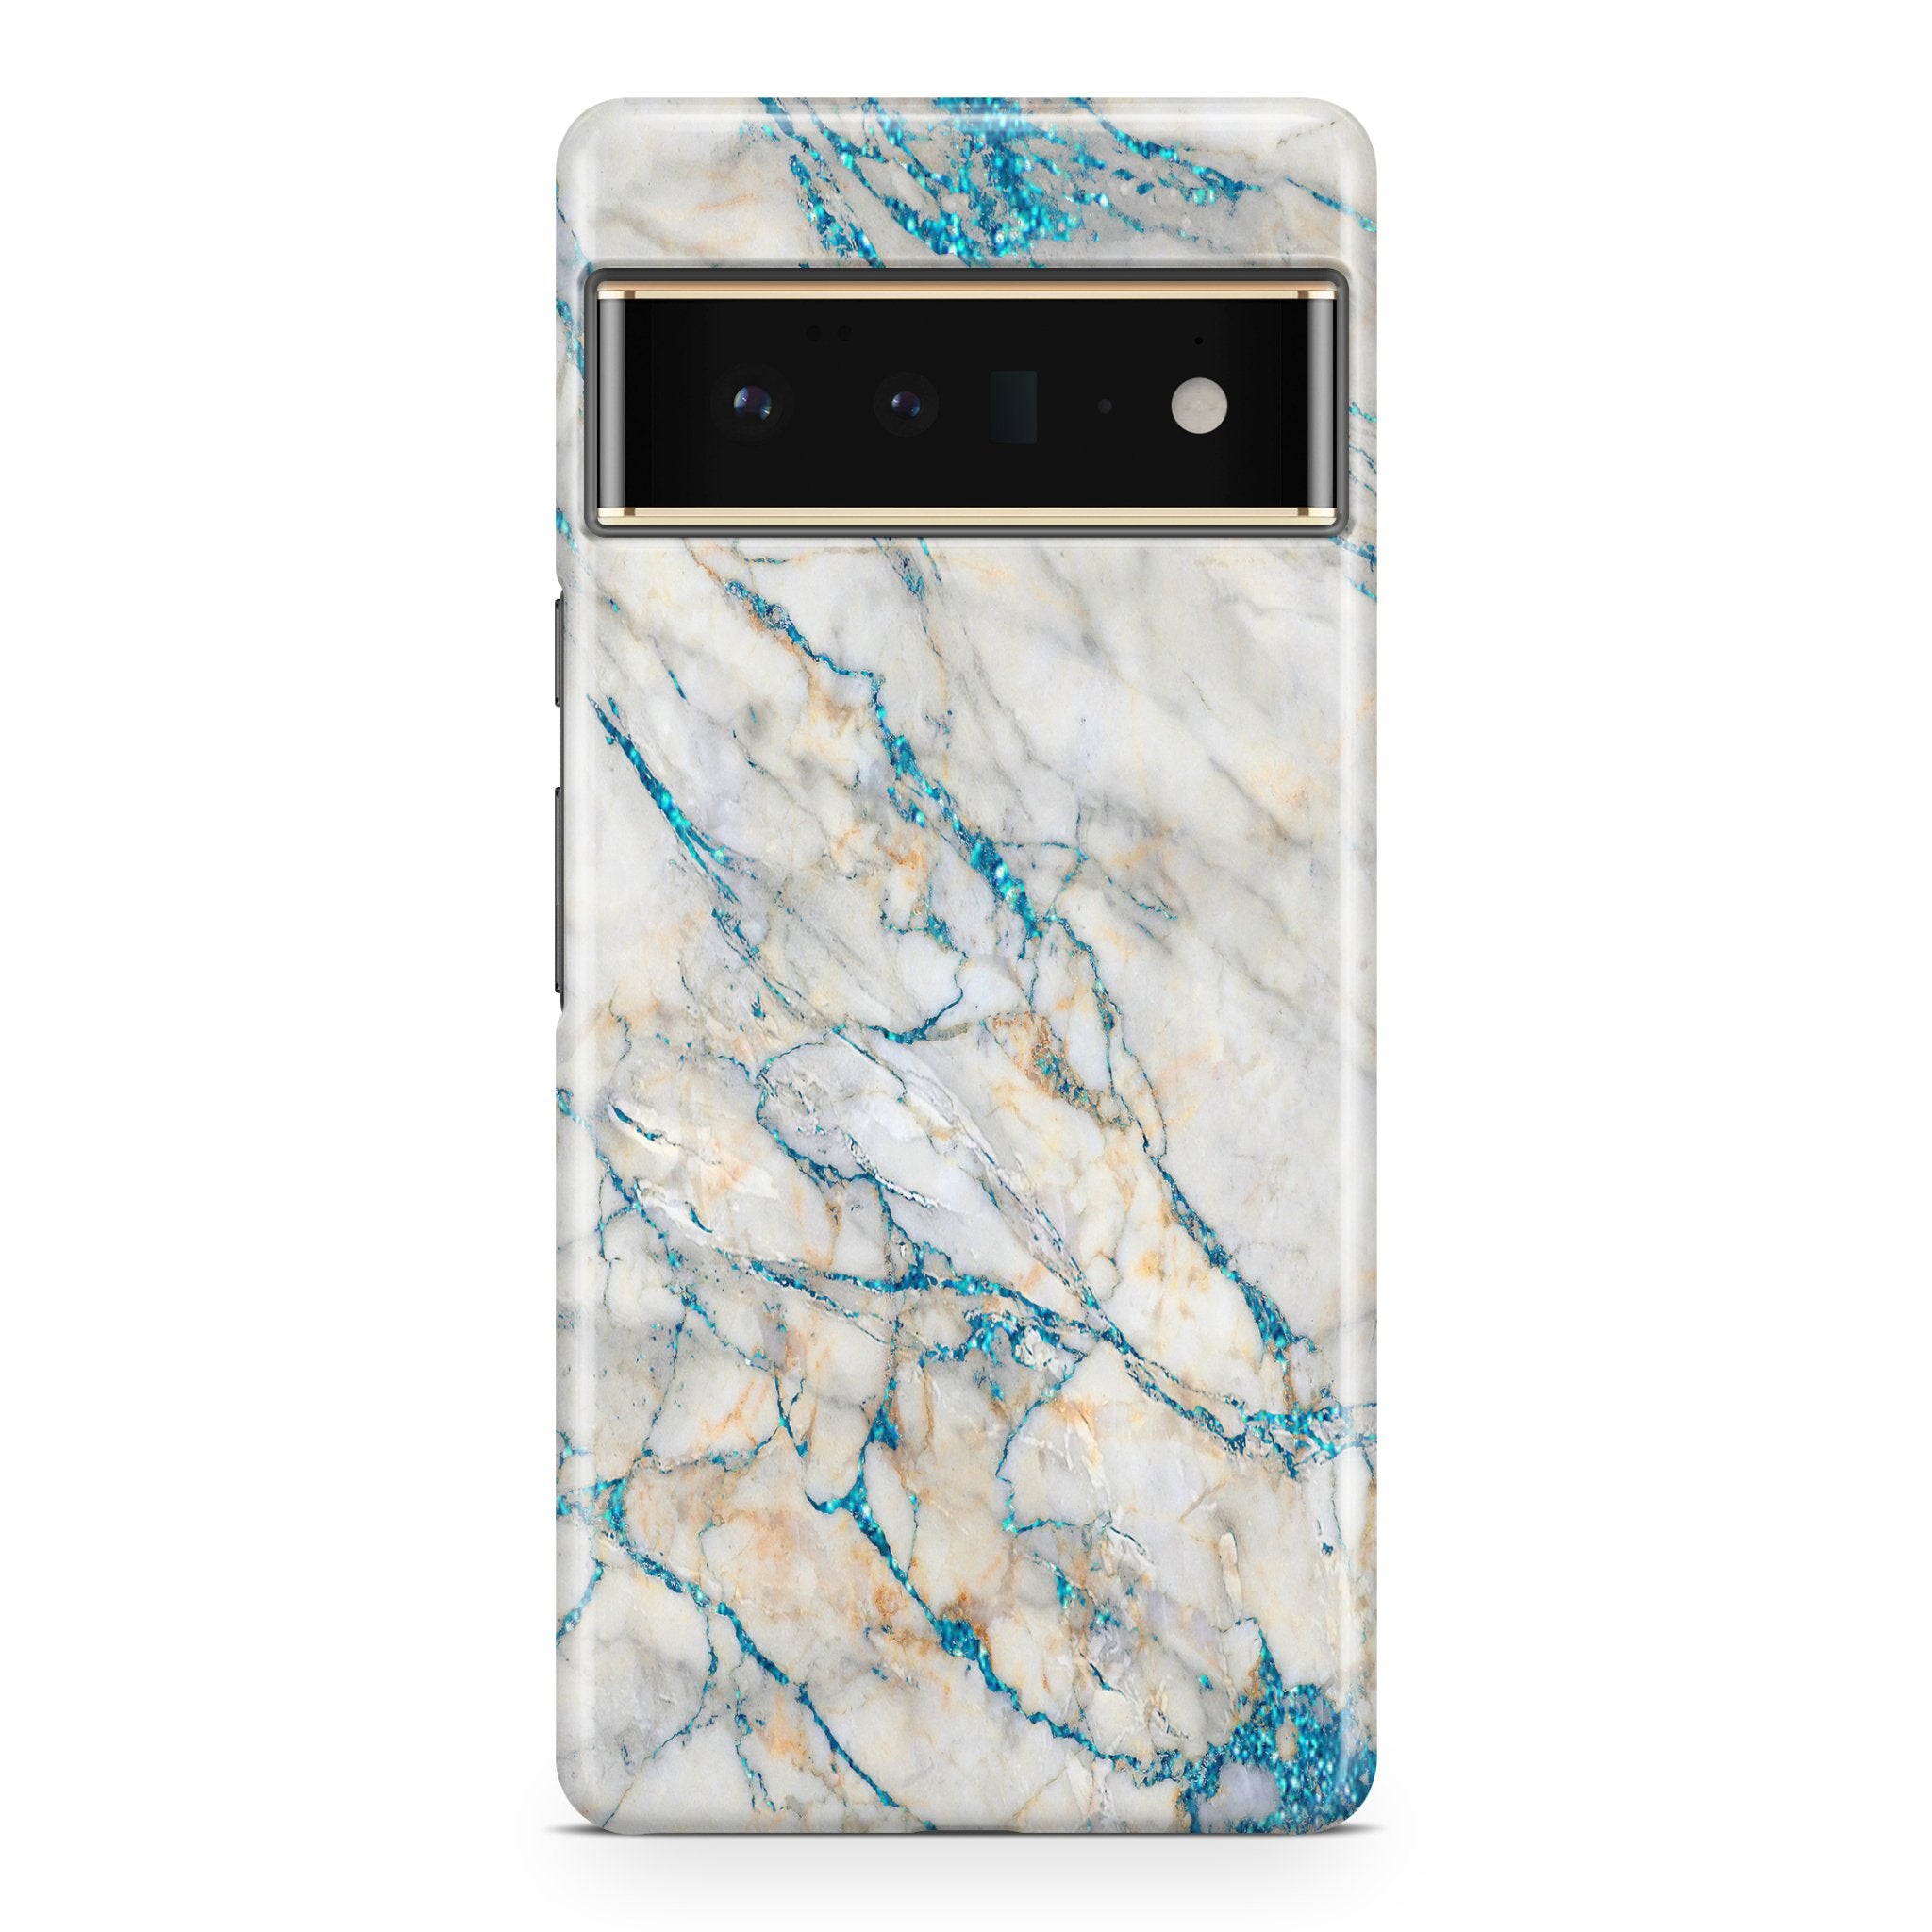 Blue White Marble - Google phone case designs by CaseSwagger